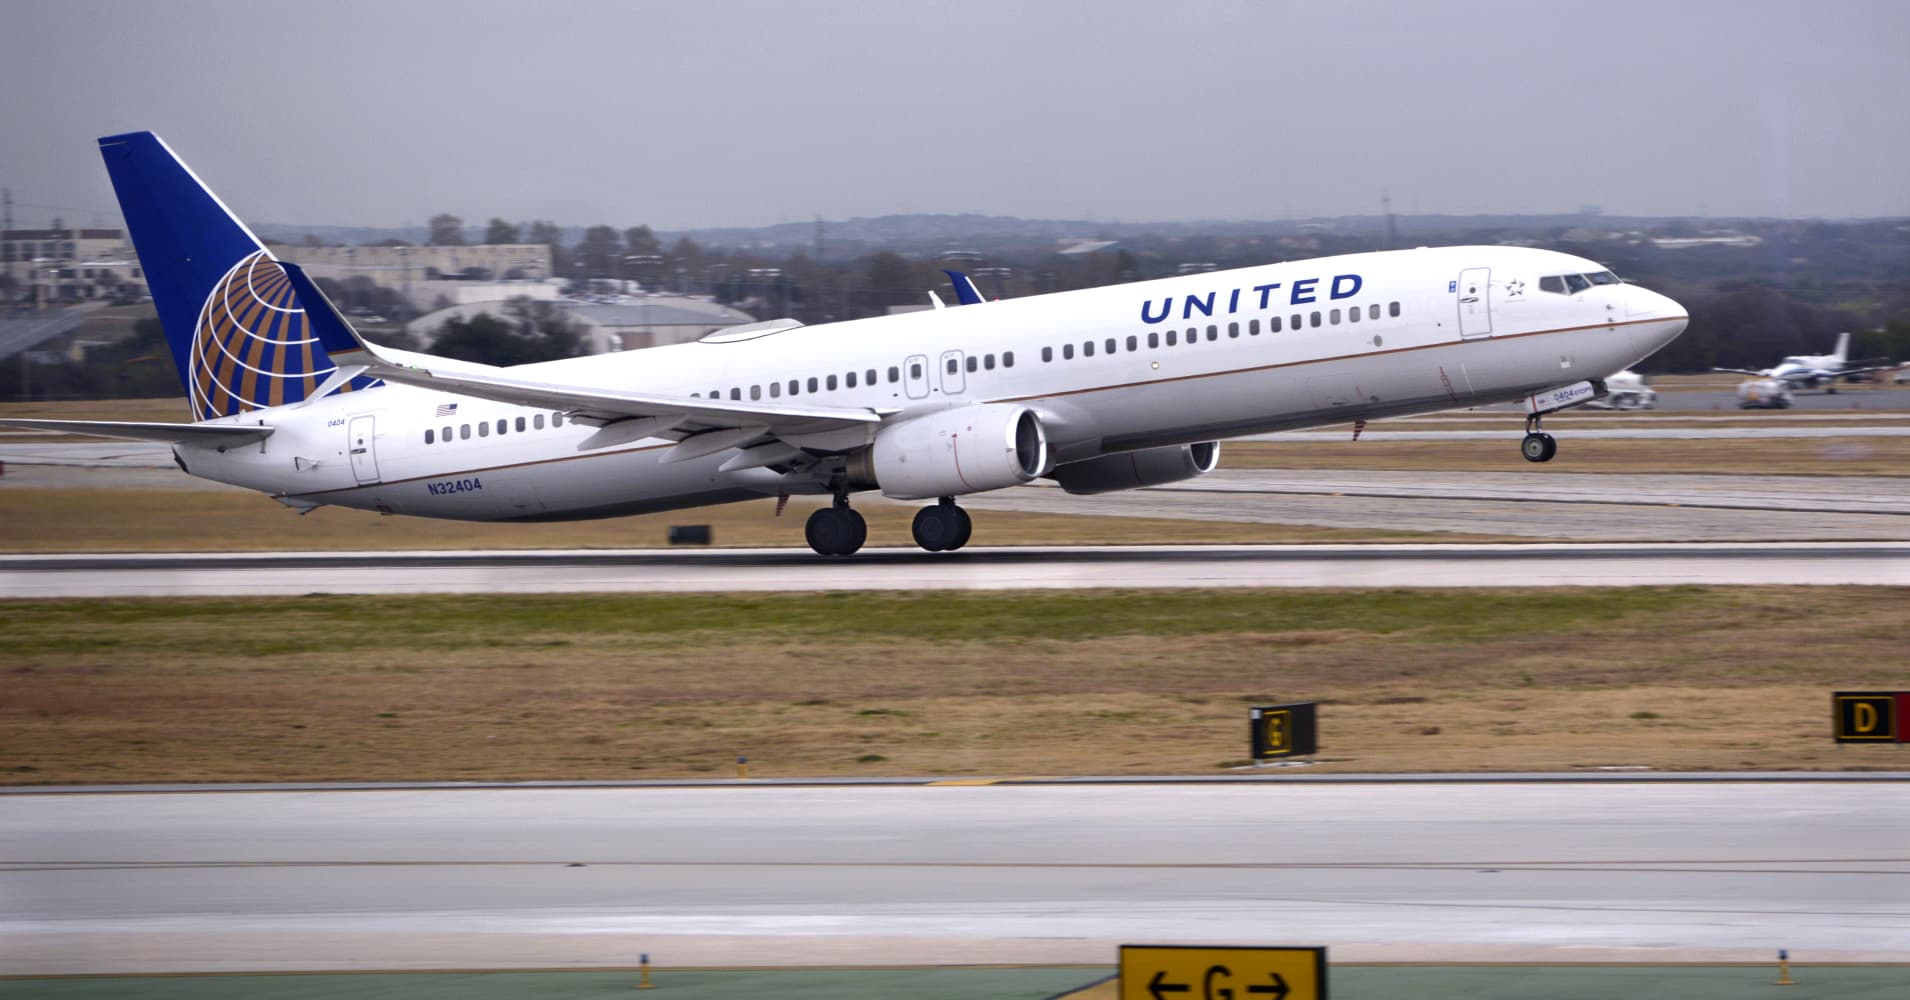 United flight declares emergency as engine shuts down in descent into Houston